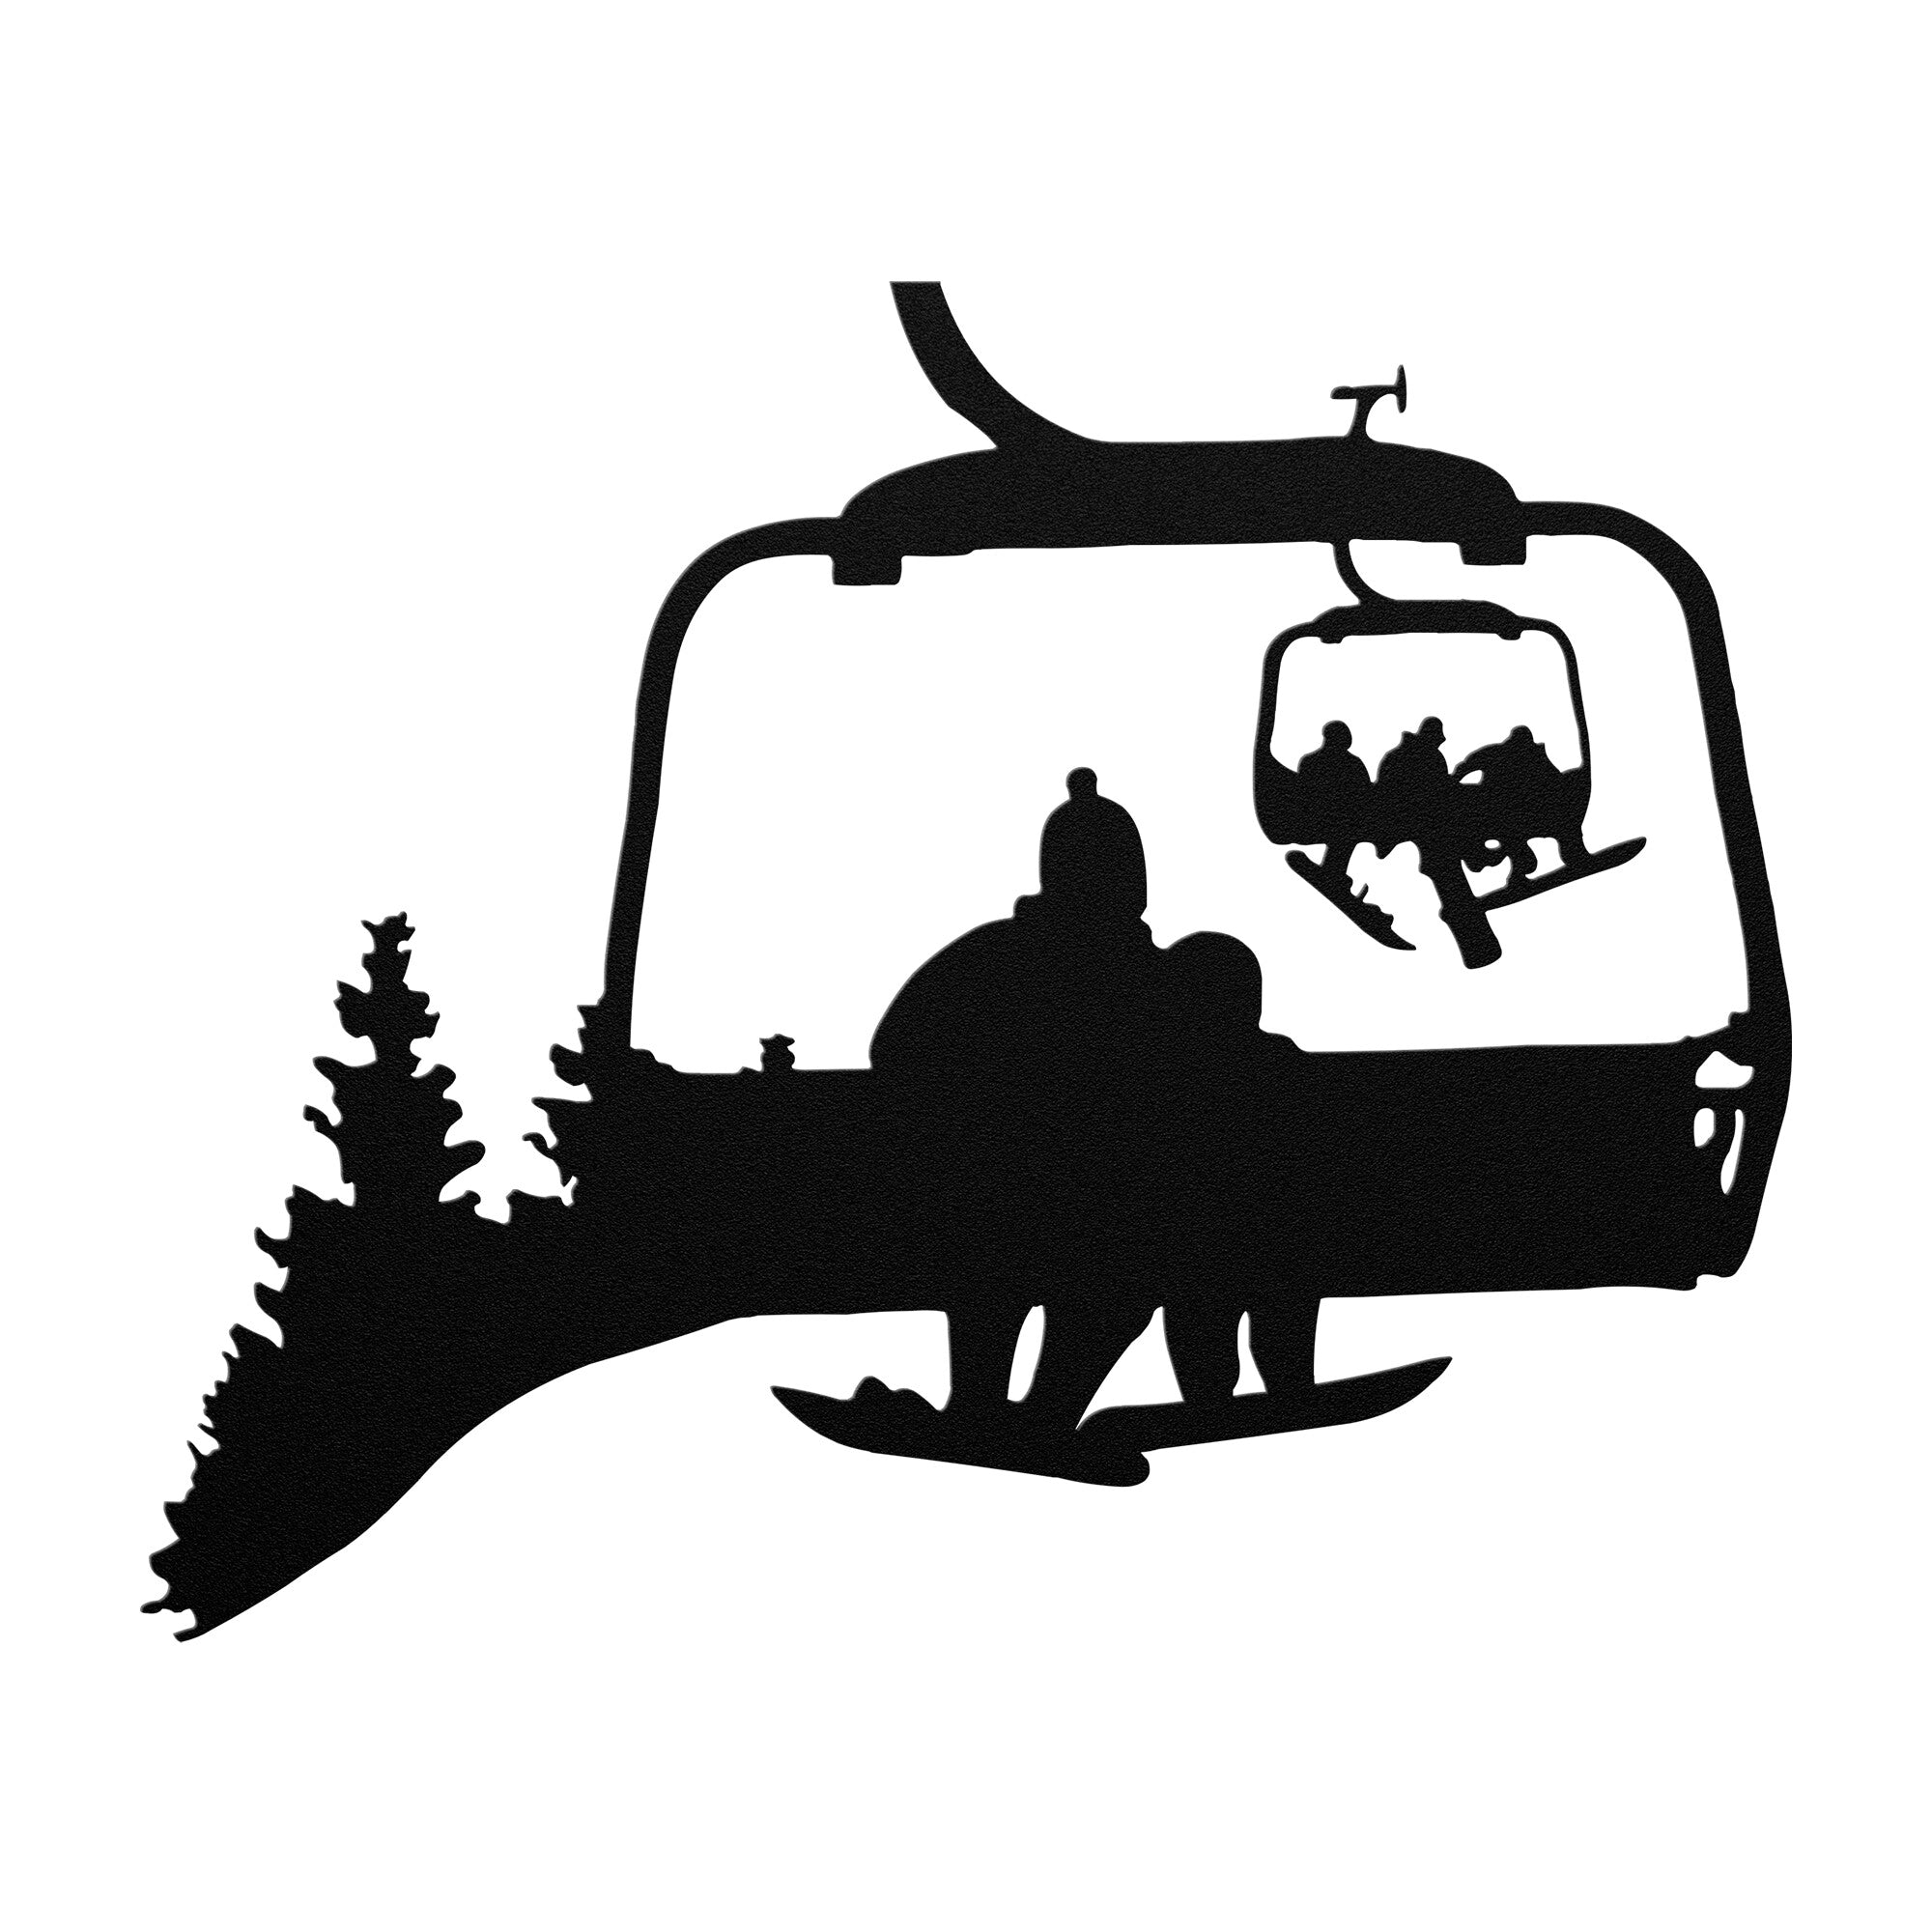 PERSONALIZED CHAIRLIFT SNOWBOARDING FAMILY METAL WALL ART, 1 SNOWBOARDING MOM, 1 SNOWBOARDING CHILD (🇺🇸 MADE IN THE USA)